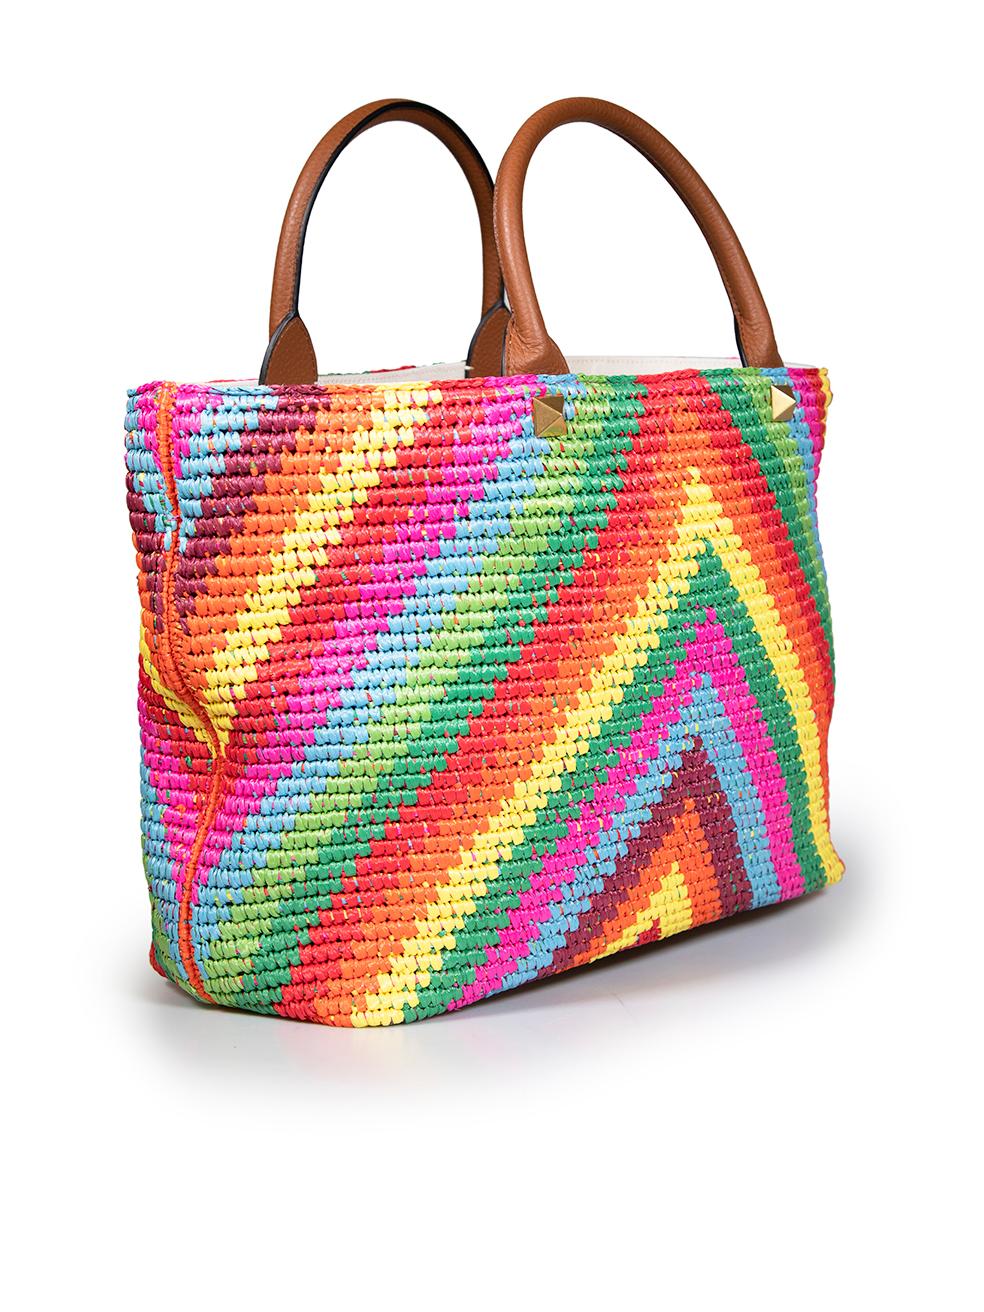 CONDITION is Very good. Hardly any visible wear to bag is evident on this used Valentino designer resale item.
 
 
 
 Details
 
 
 Multicolour - rainbow
 
 Raffia
 
 Large tote bag
 
 Chevron pattern
 
 2x Brown leather top handles
 
 1x Detachable